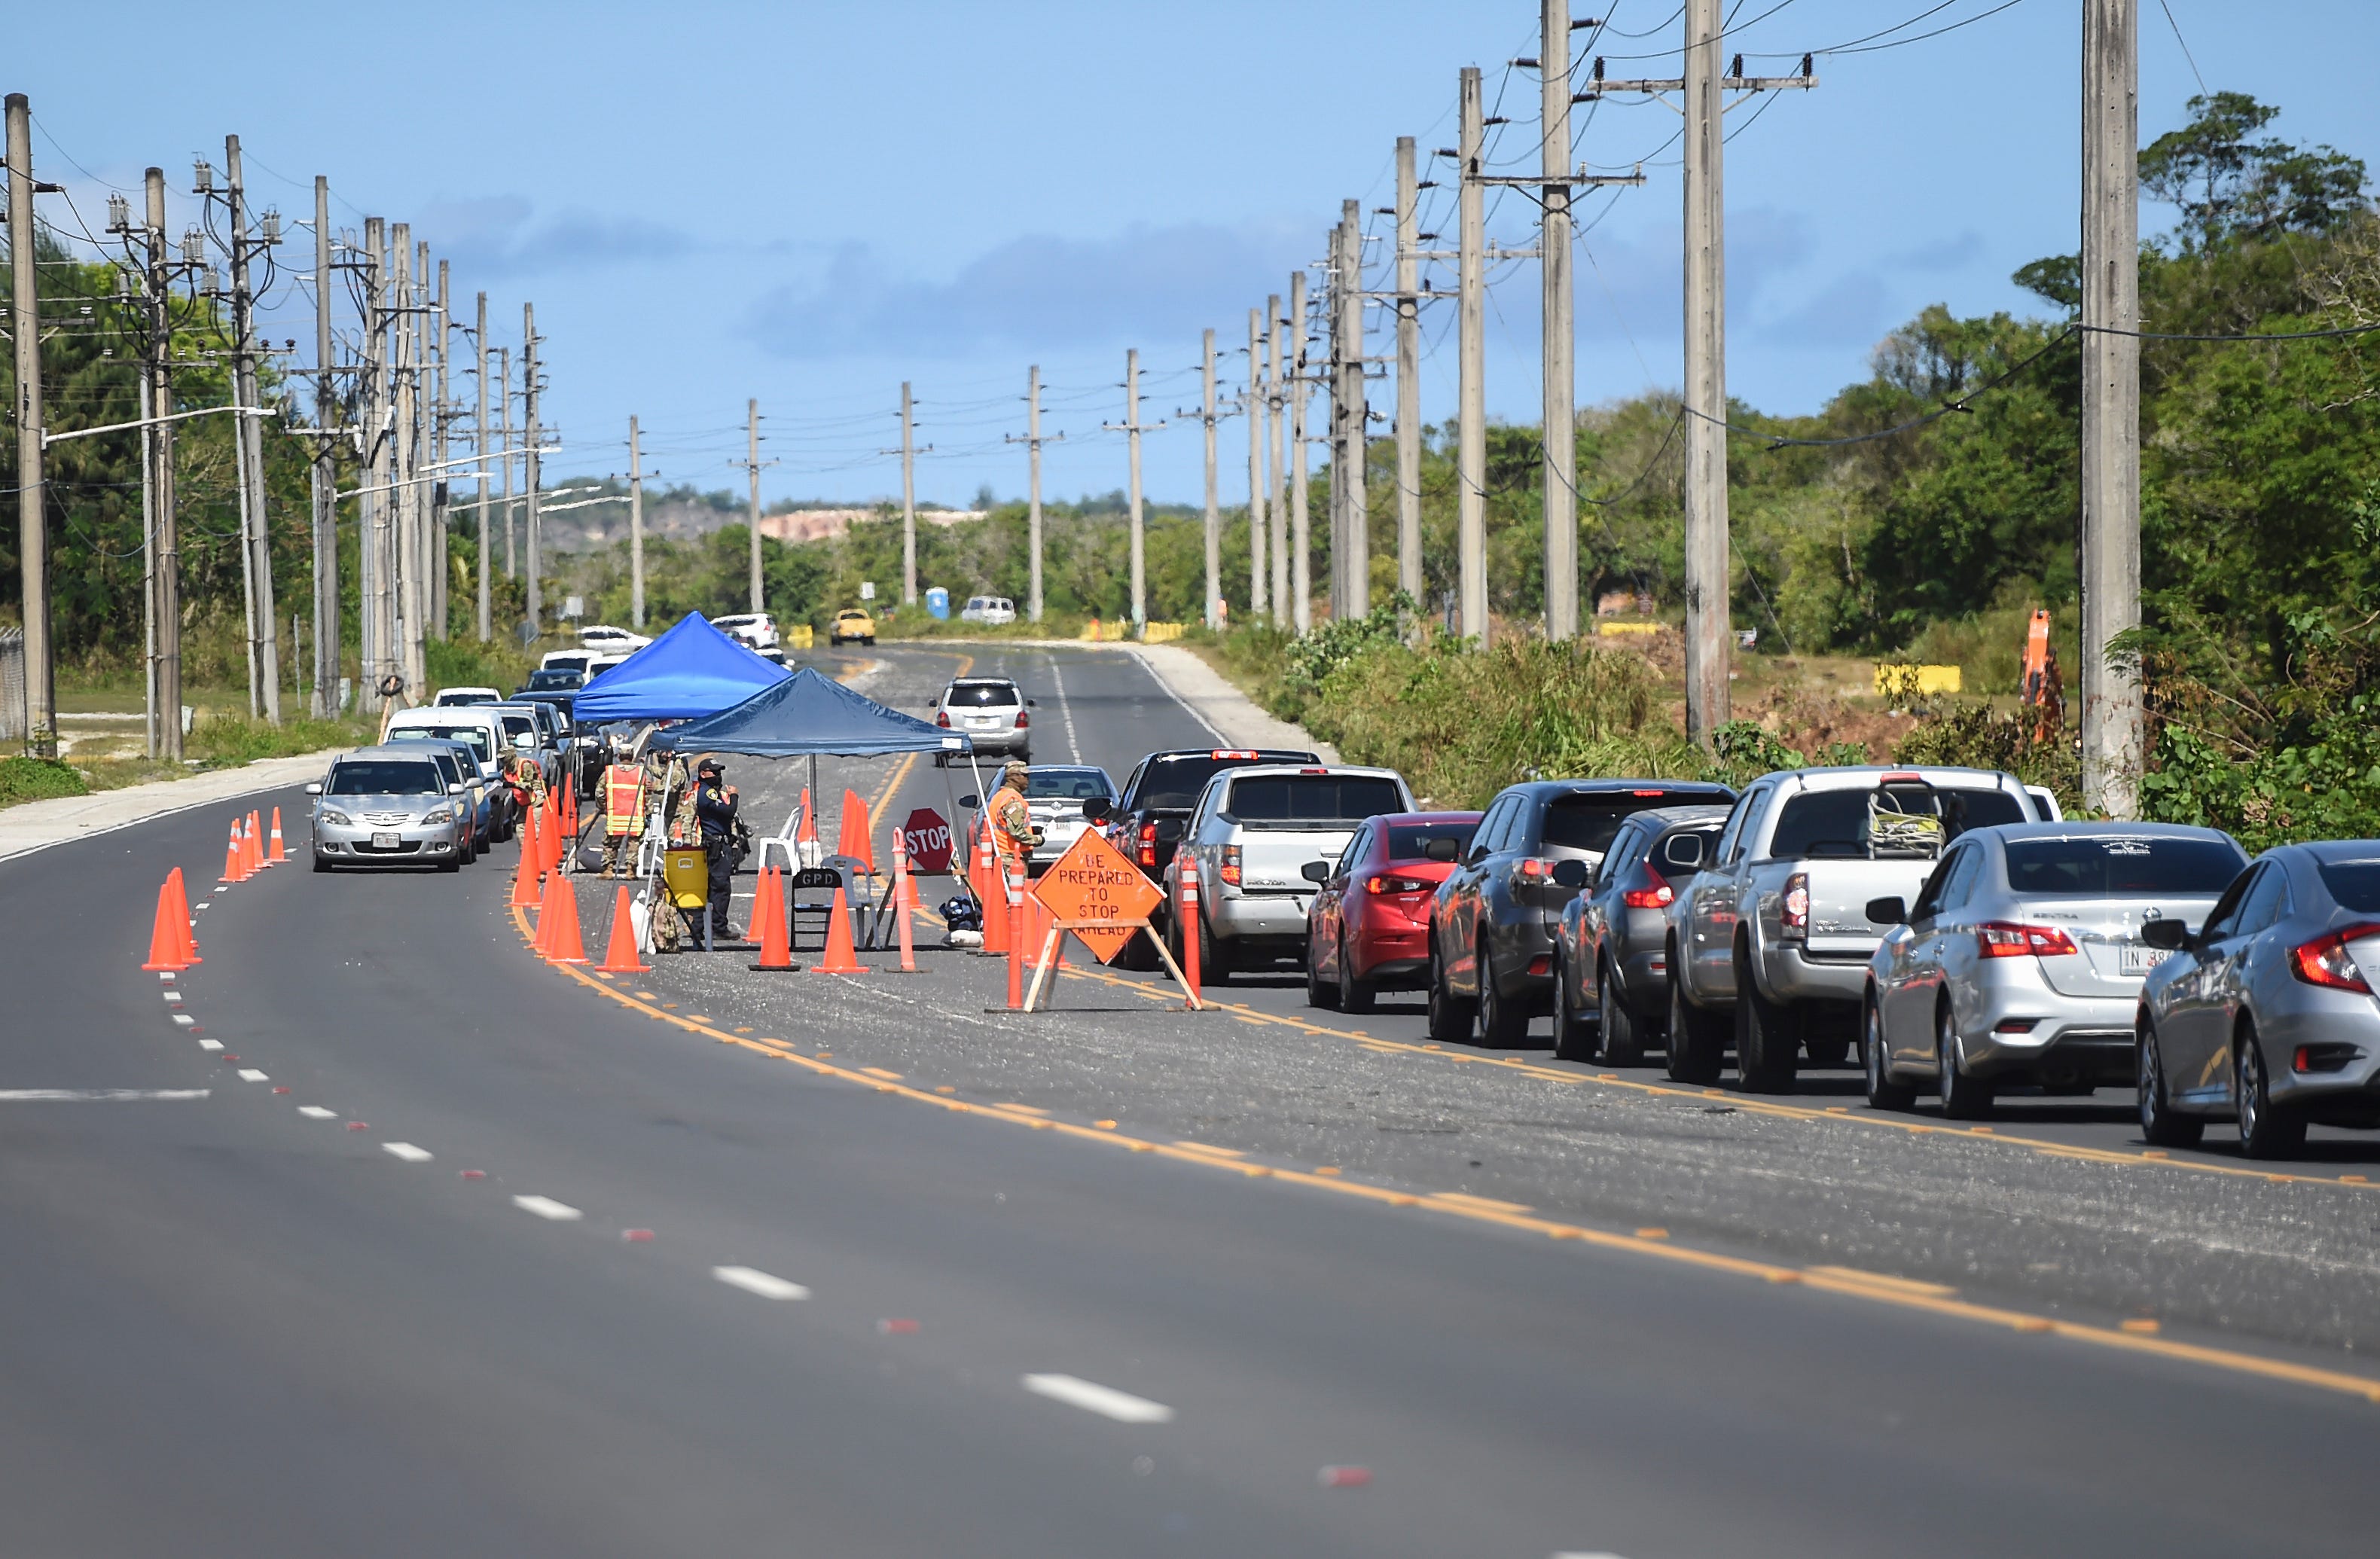 A road closure in Dededo creates long lines of traffic on Route 1, April 13, 2020.